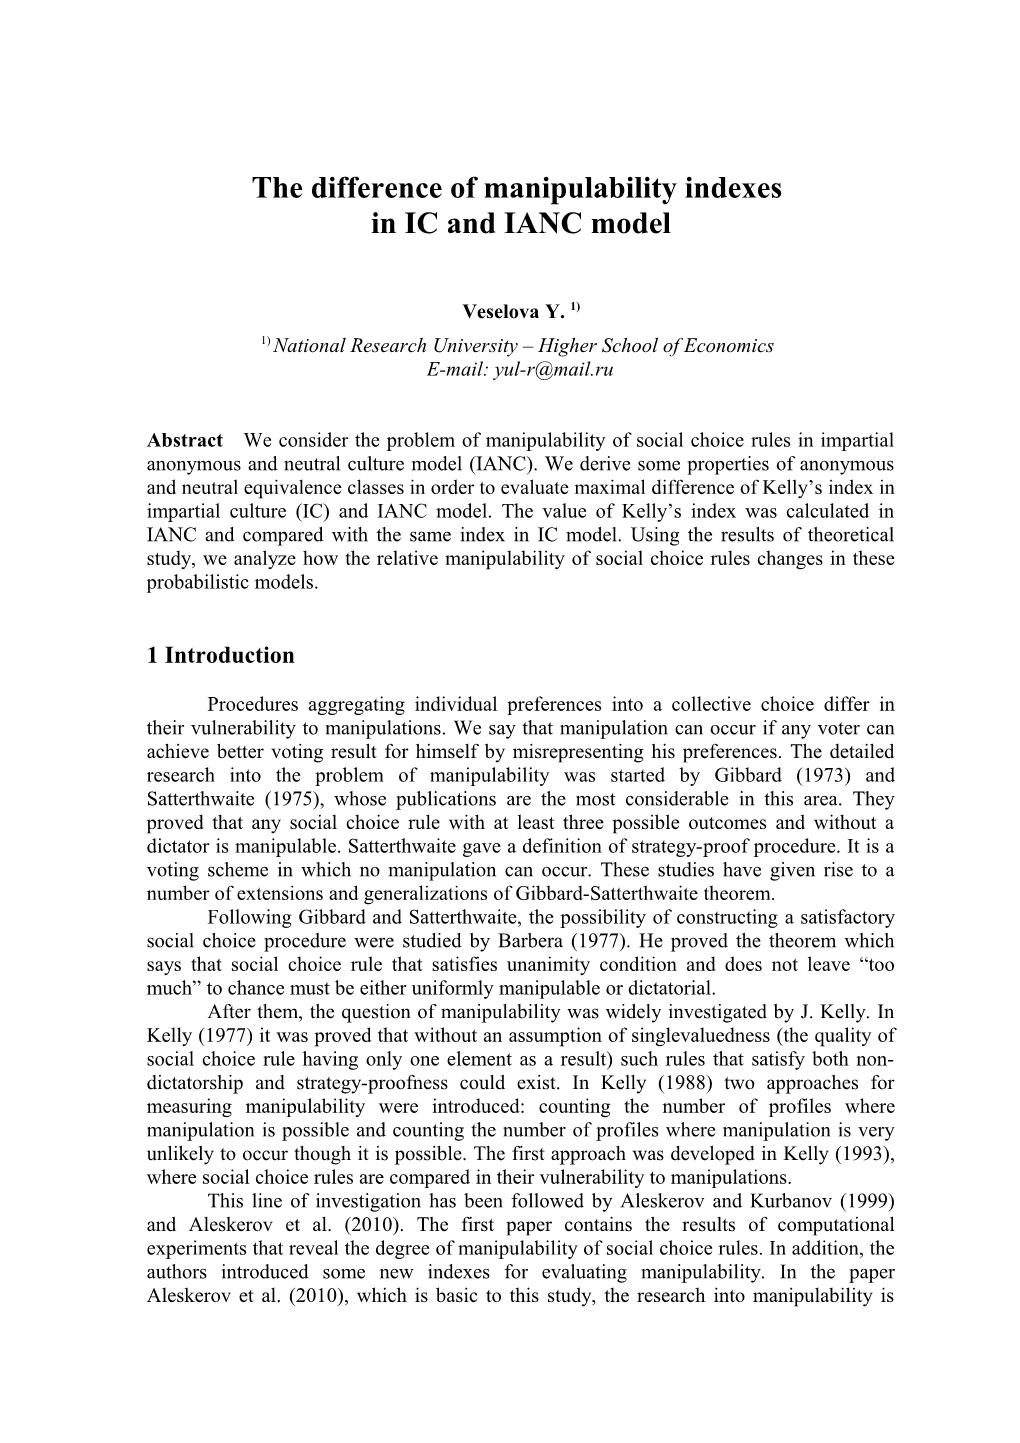 The Difference of Kelly's Indexes of Manipulability in IC and IANC Model